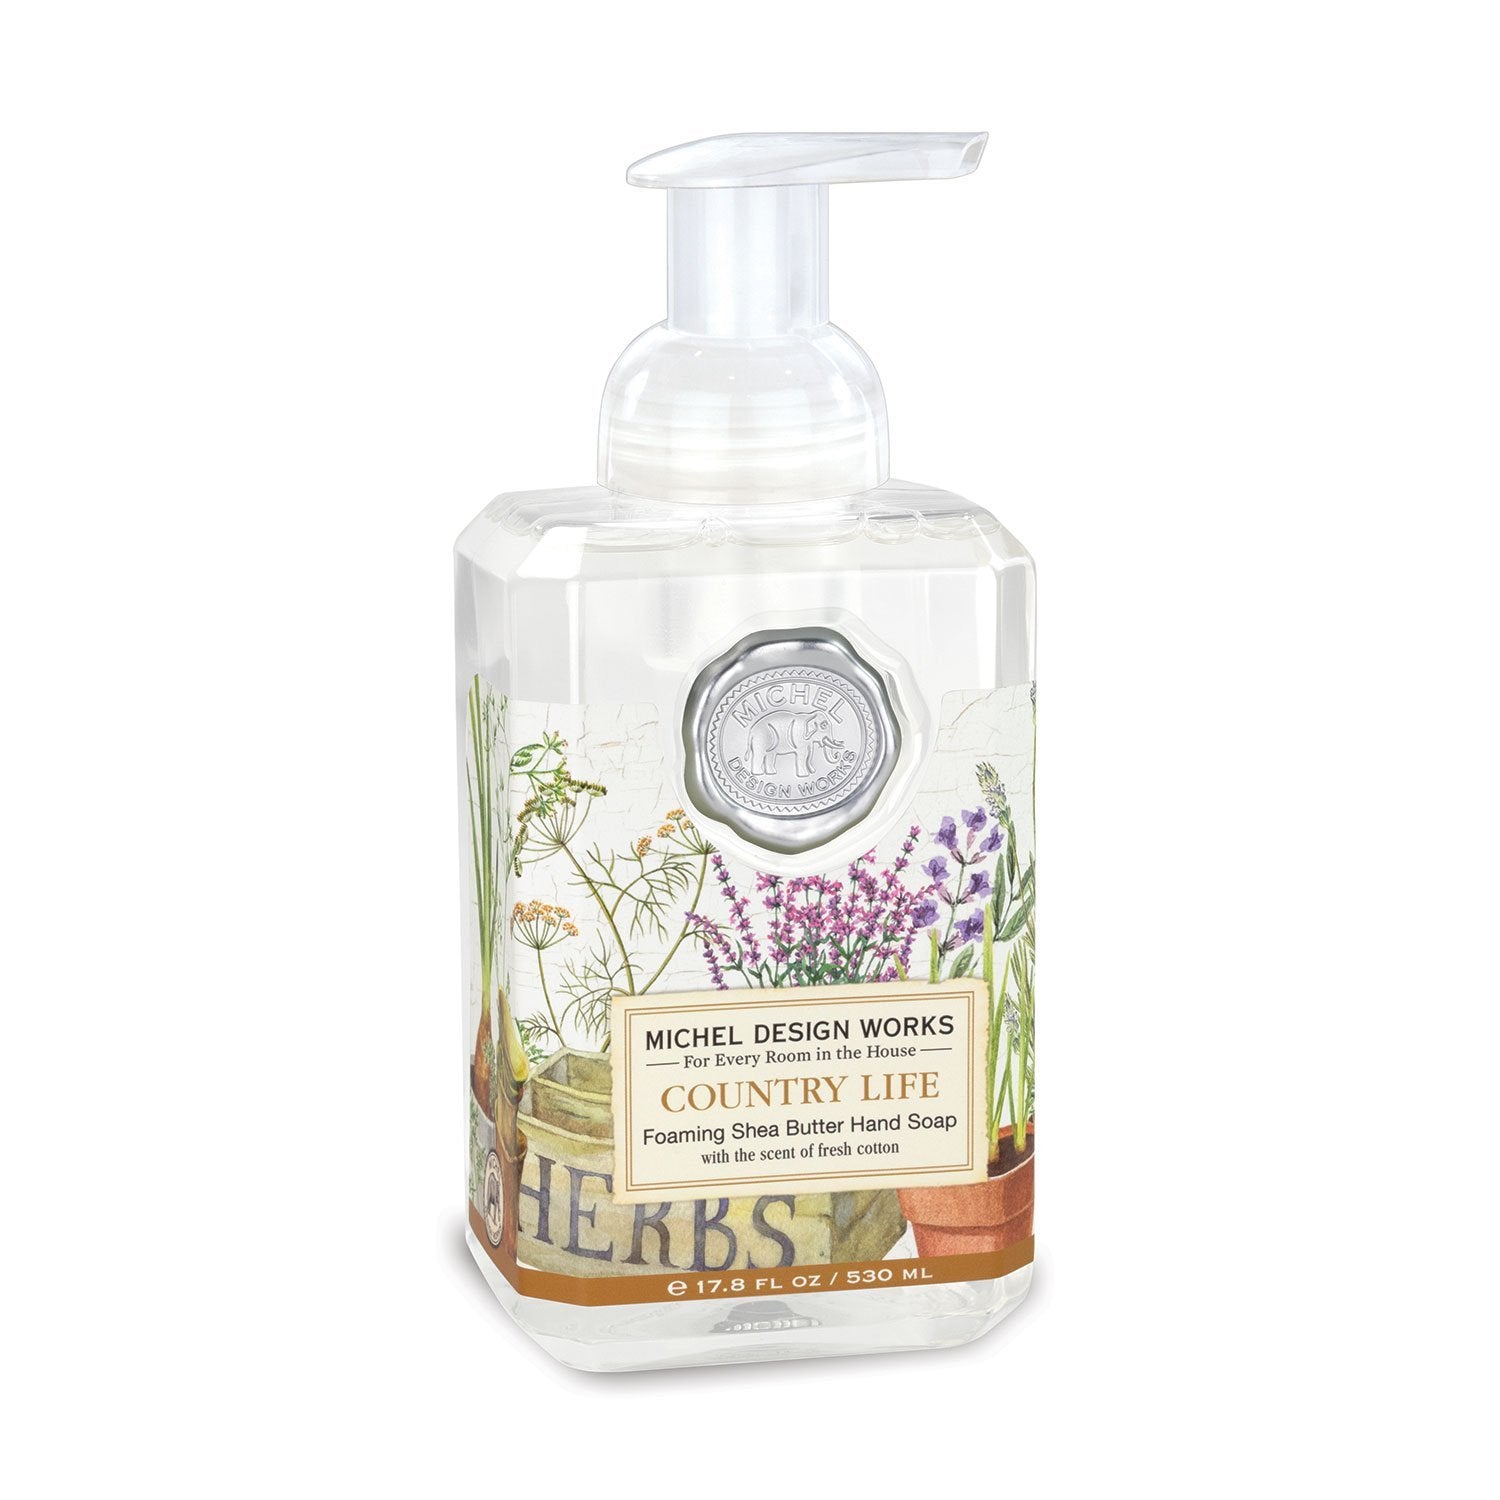 Country Life Foaming Shea Butter Hand Soap    